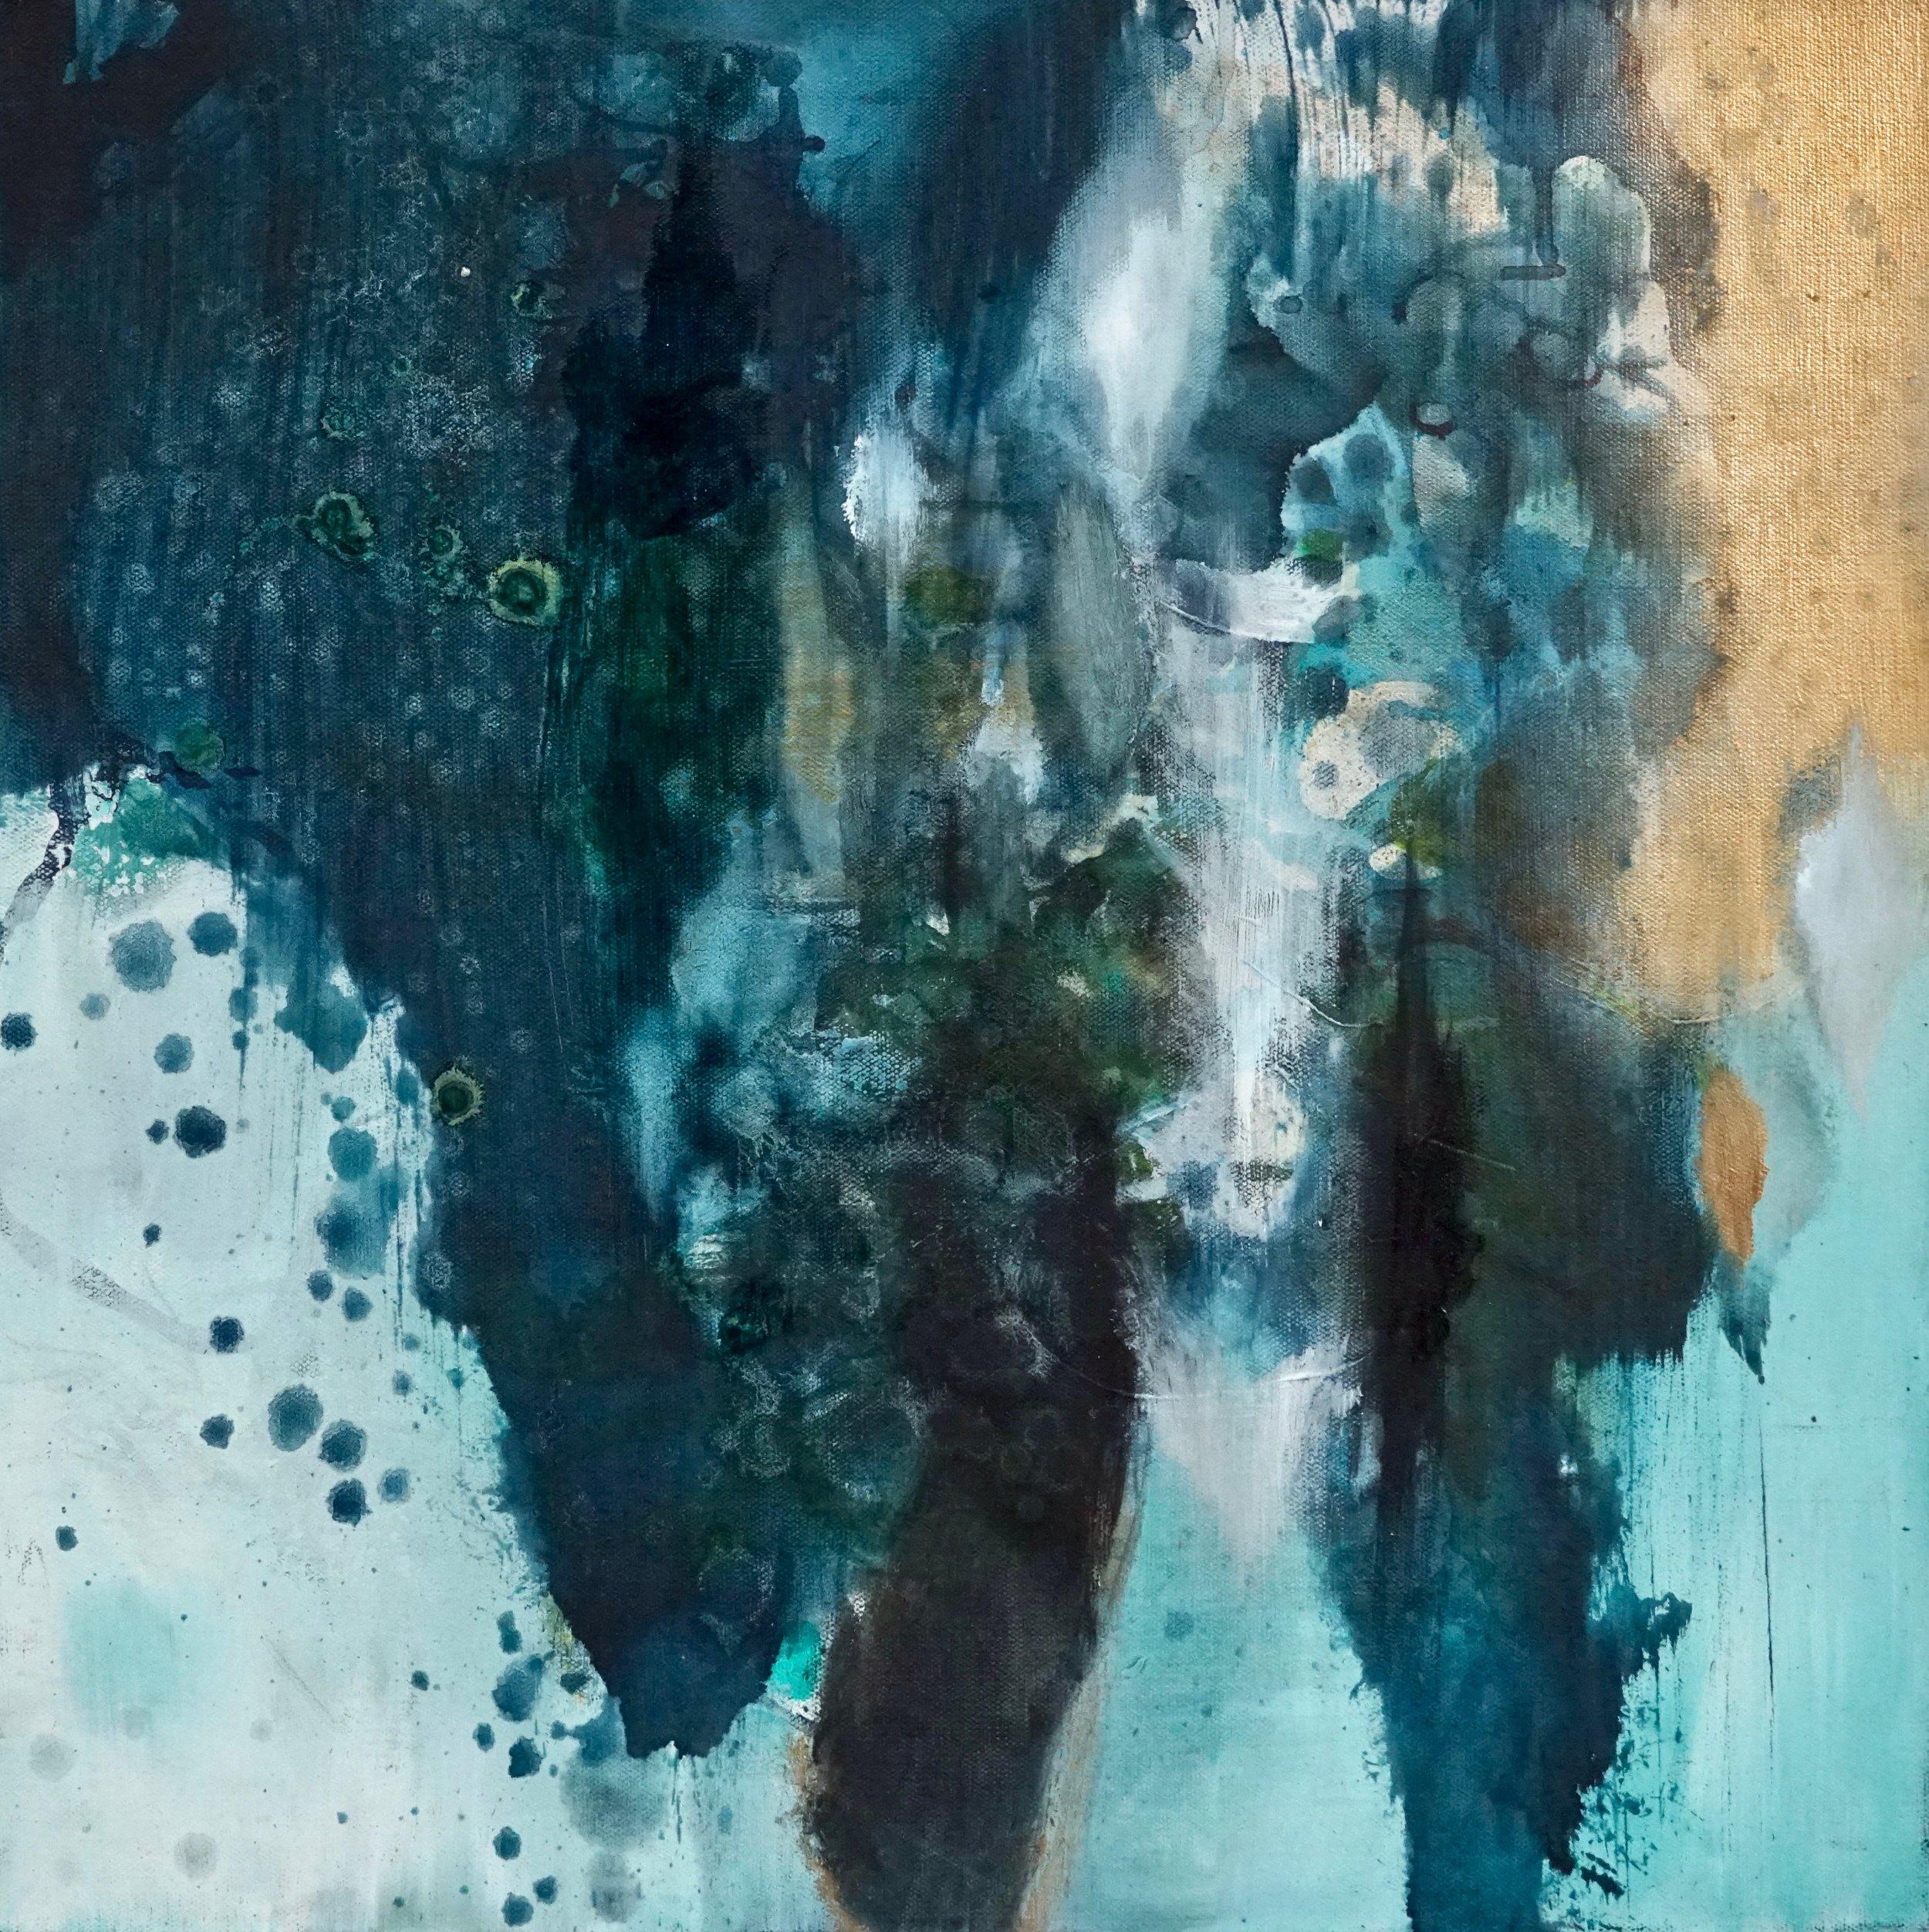 Promise of a New Morning by Sarah Raskey is a 20 x 20 inch mixed media abstract painting on canvas. 
Tranquil turquoise and gold wash over a serene blue-green abstract atmosphere. 

Sarah Raskey is a visionary artist, a licensed clinical